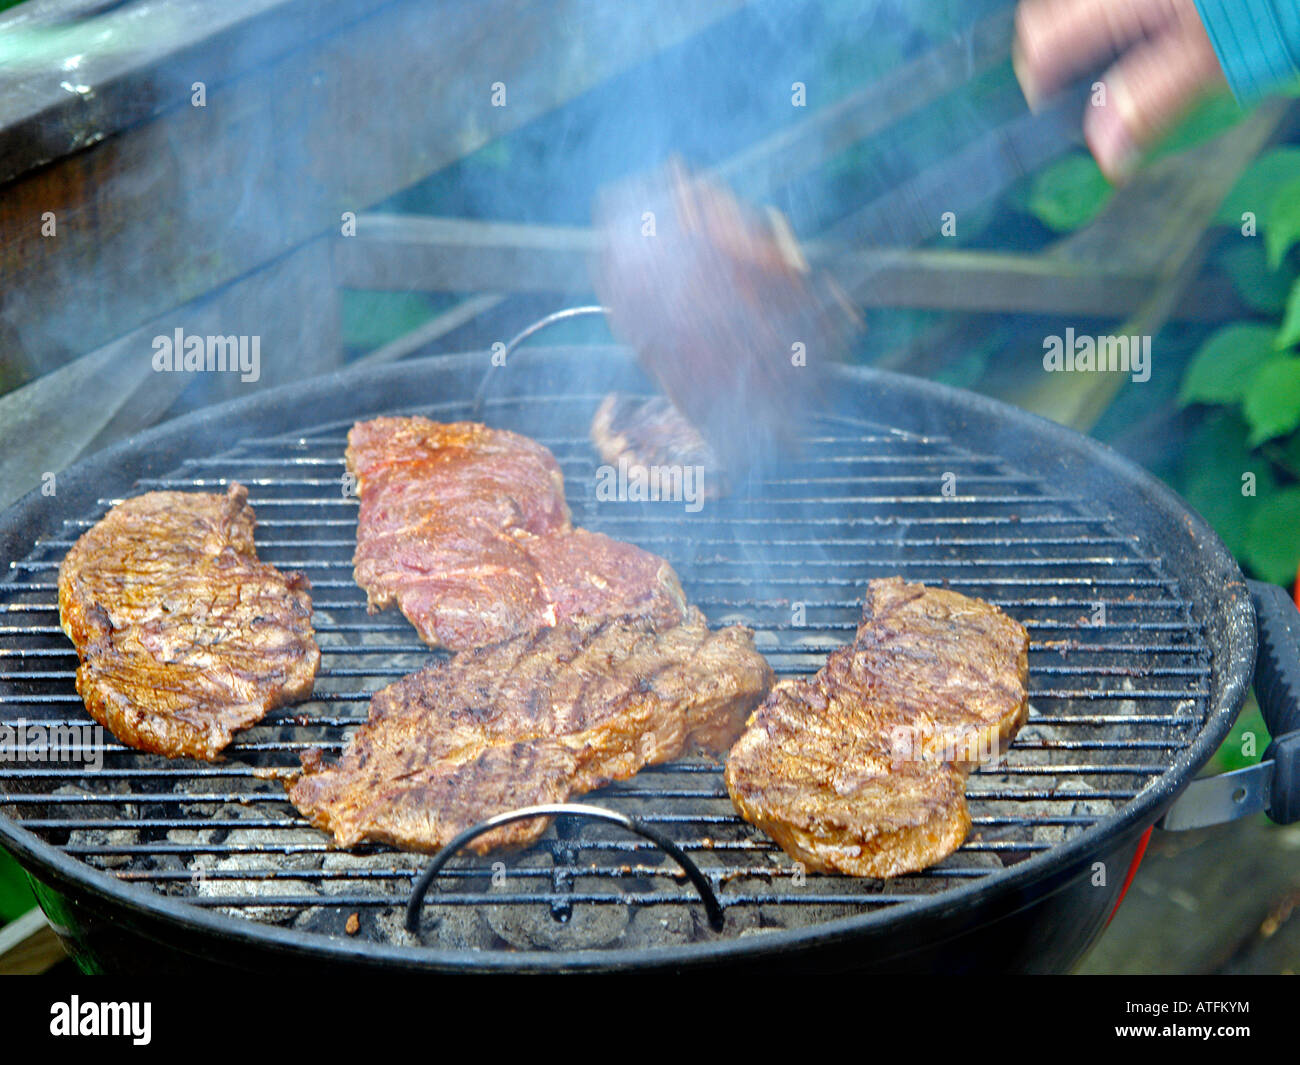 Grilling steaks Stock Photo